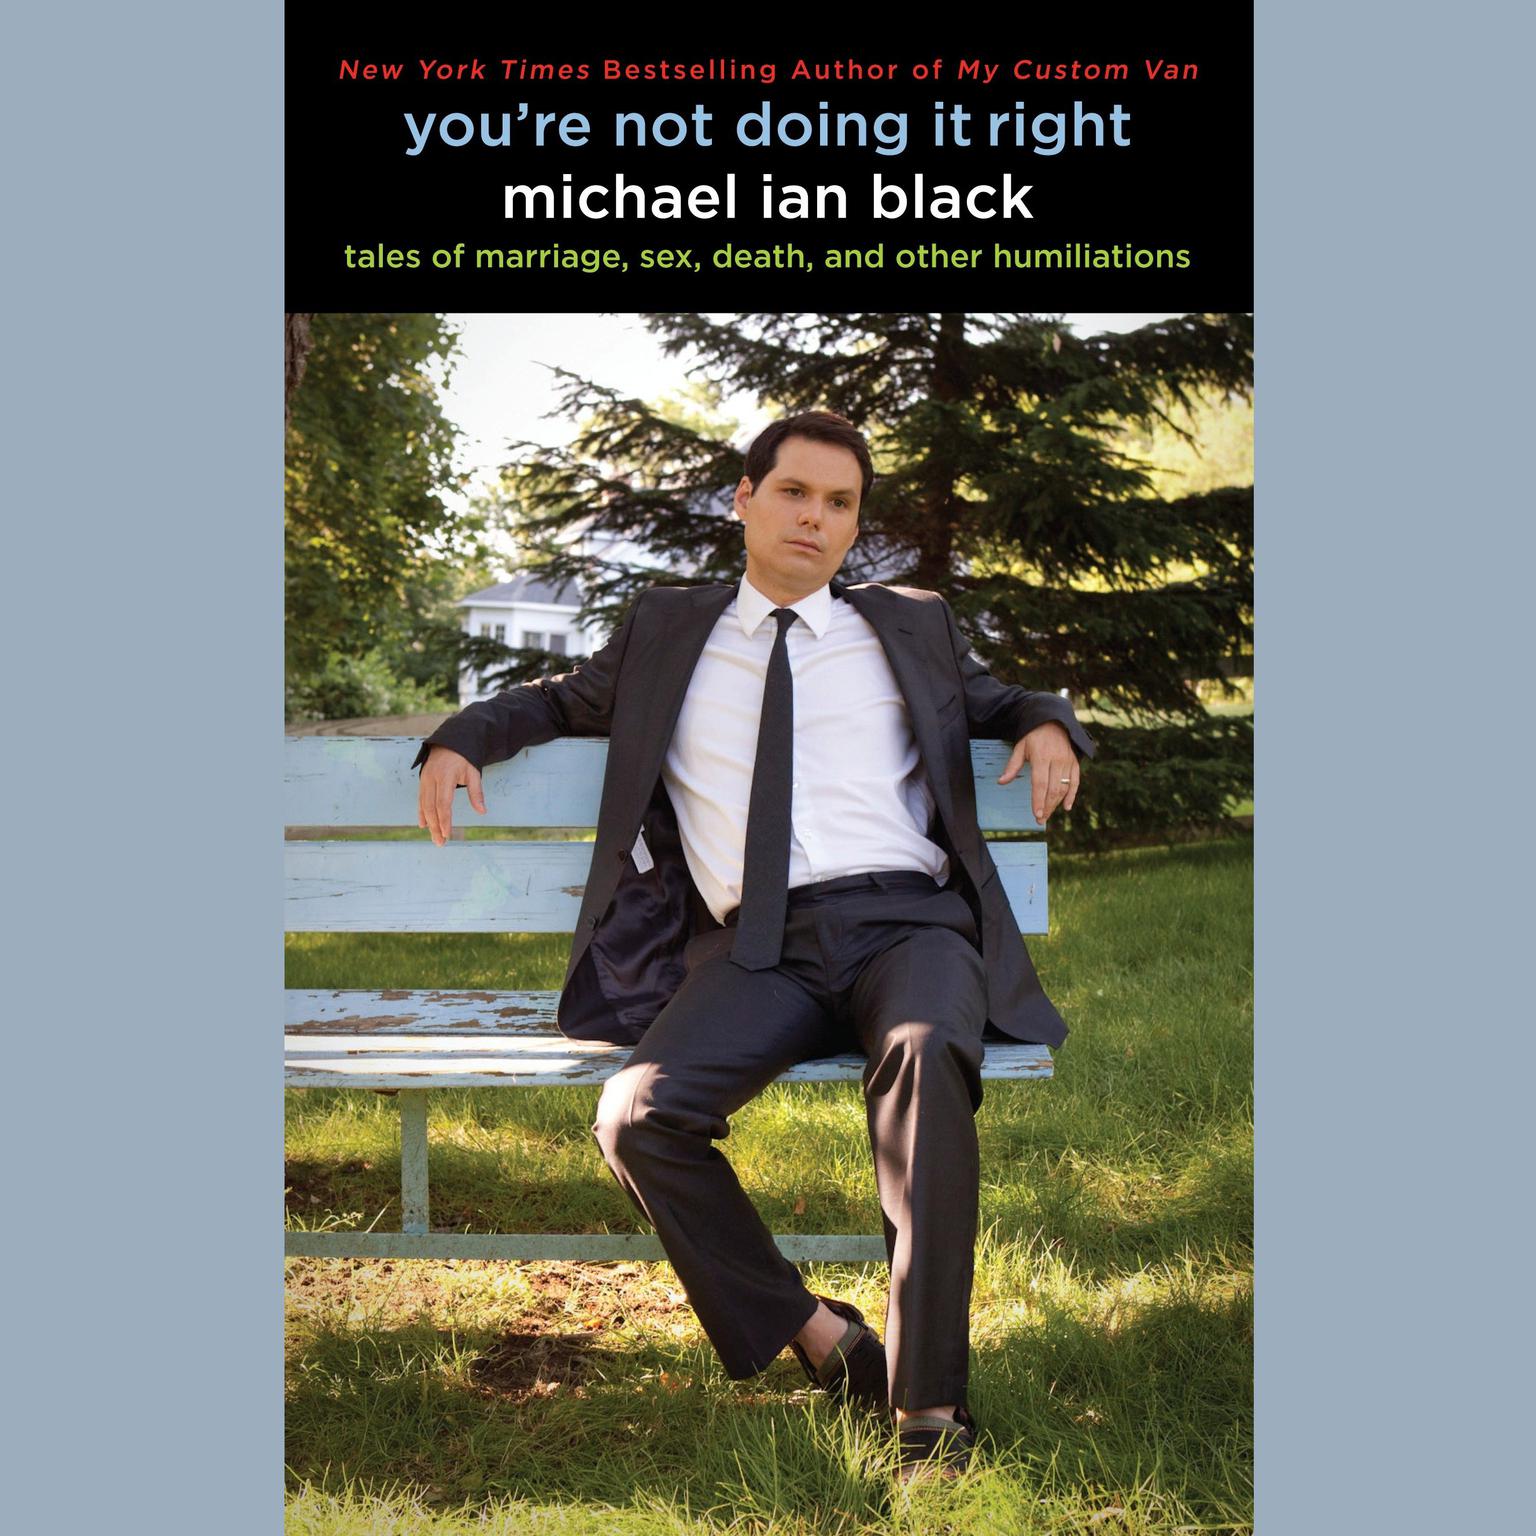 Youre Not Doing It Right: Tales of Marriage, Sex, Death, and Other Humiliations Audiobook, by Michael Ian Black